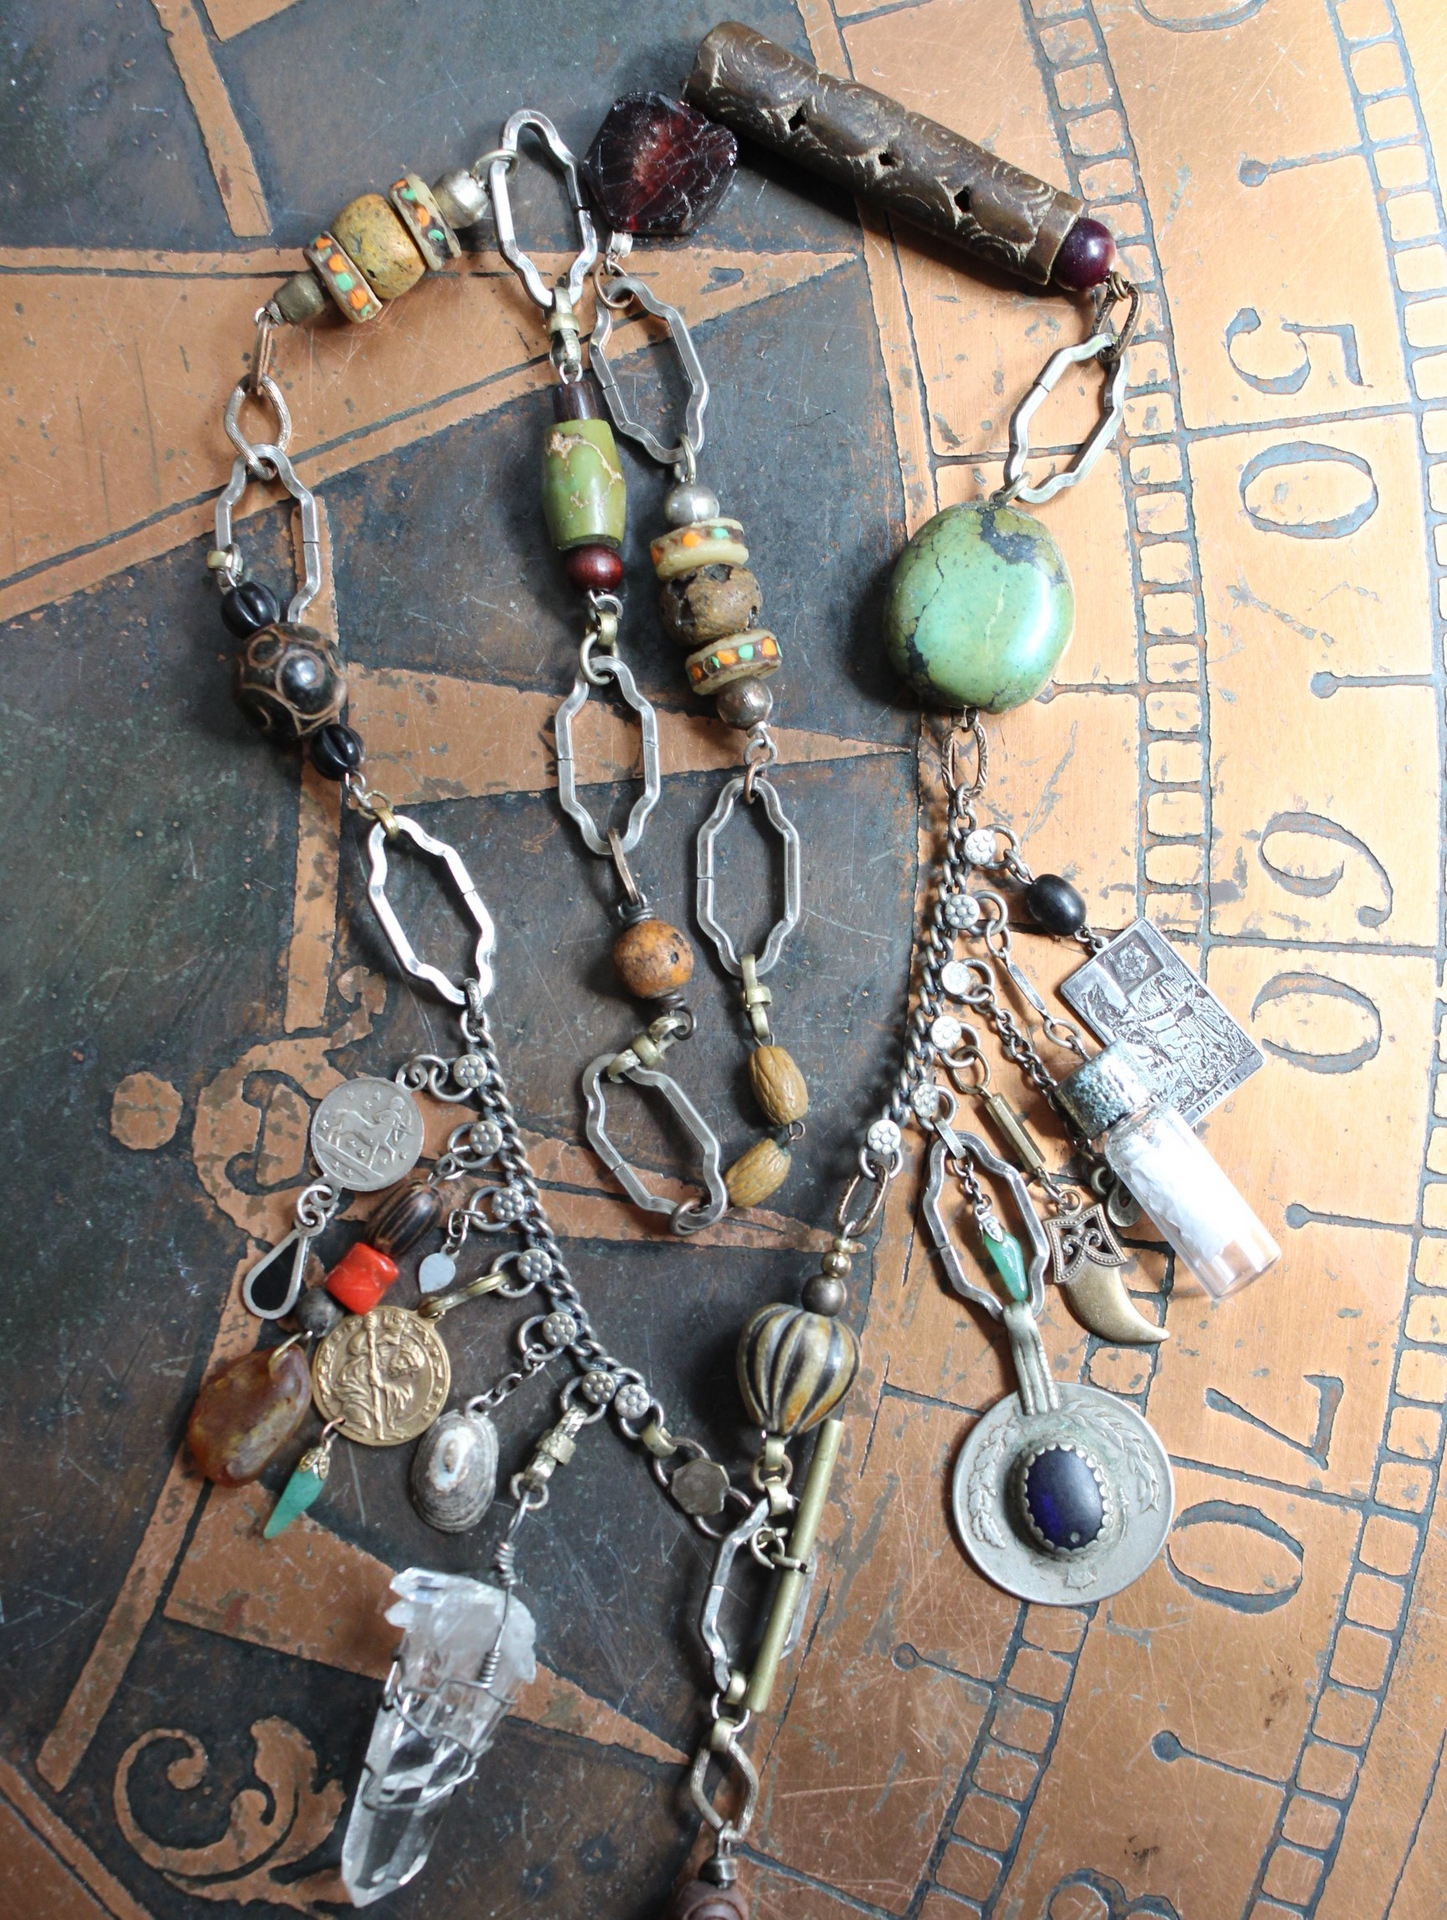 The Artifacts of Life Necklace with Multiple Unique Findings,Artisan Bead Cairn,Turquoise and Garnet Stones,Prayer Vessel,Rock Quartz Point